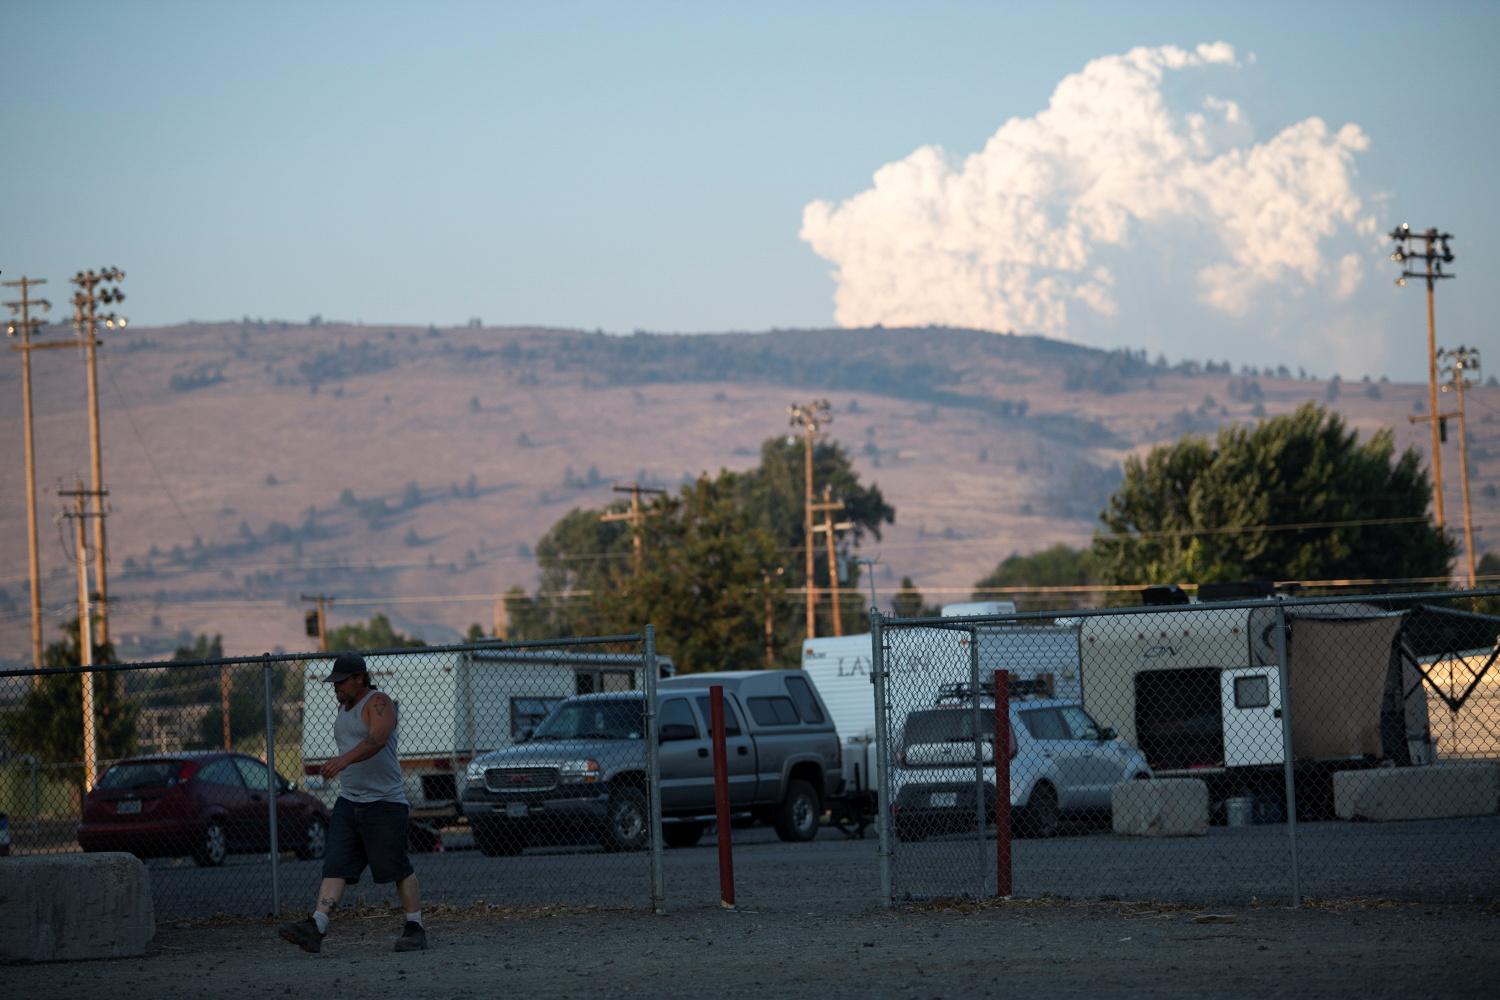 Bootleg Fire evacuees take shelter at a Red Cross evacuation center as extreme heat and wildfires continue in Klamath Falls, Oregon, on Ju